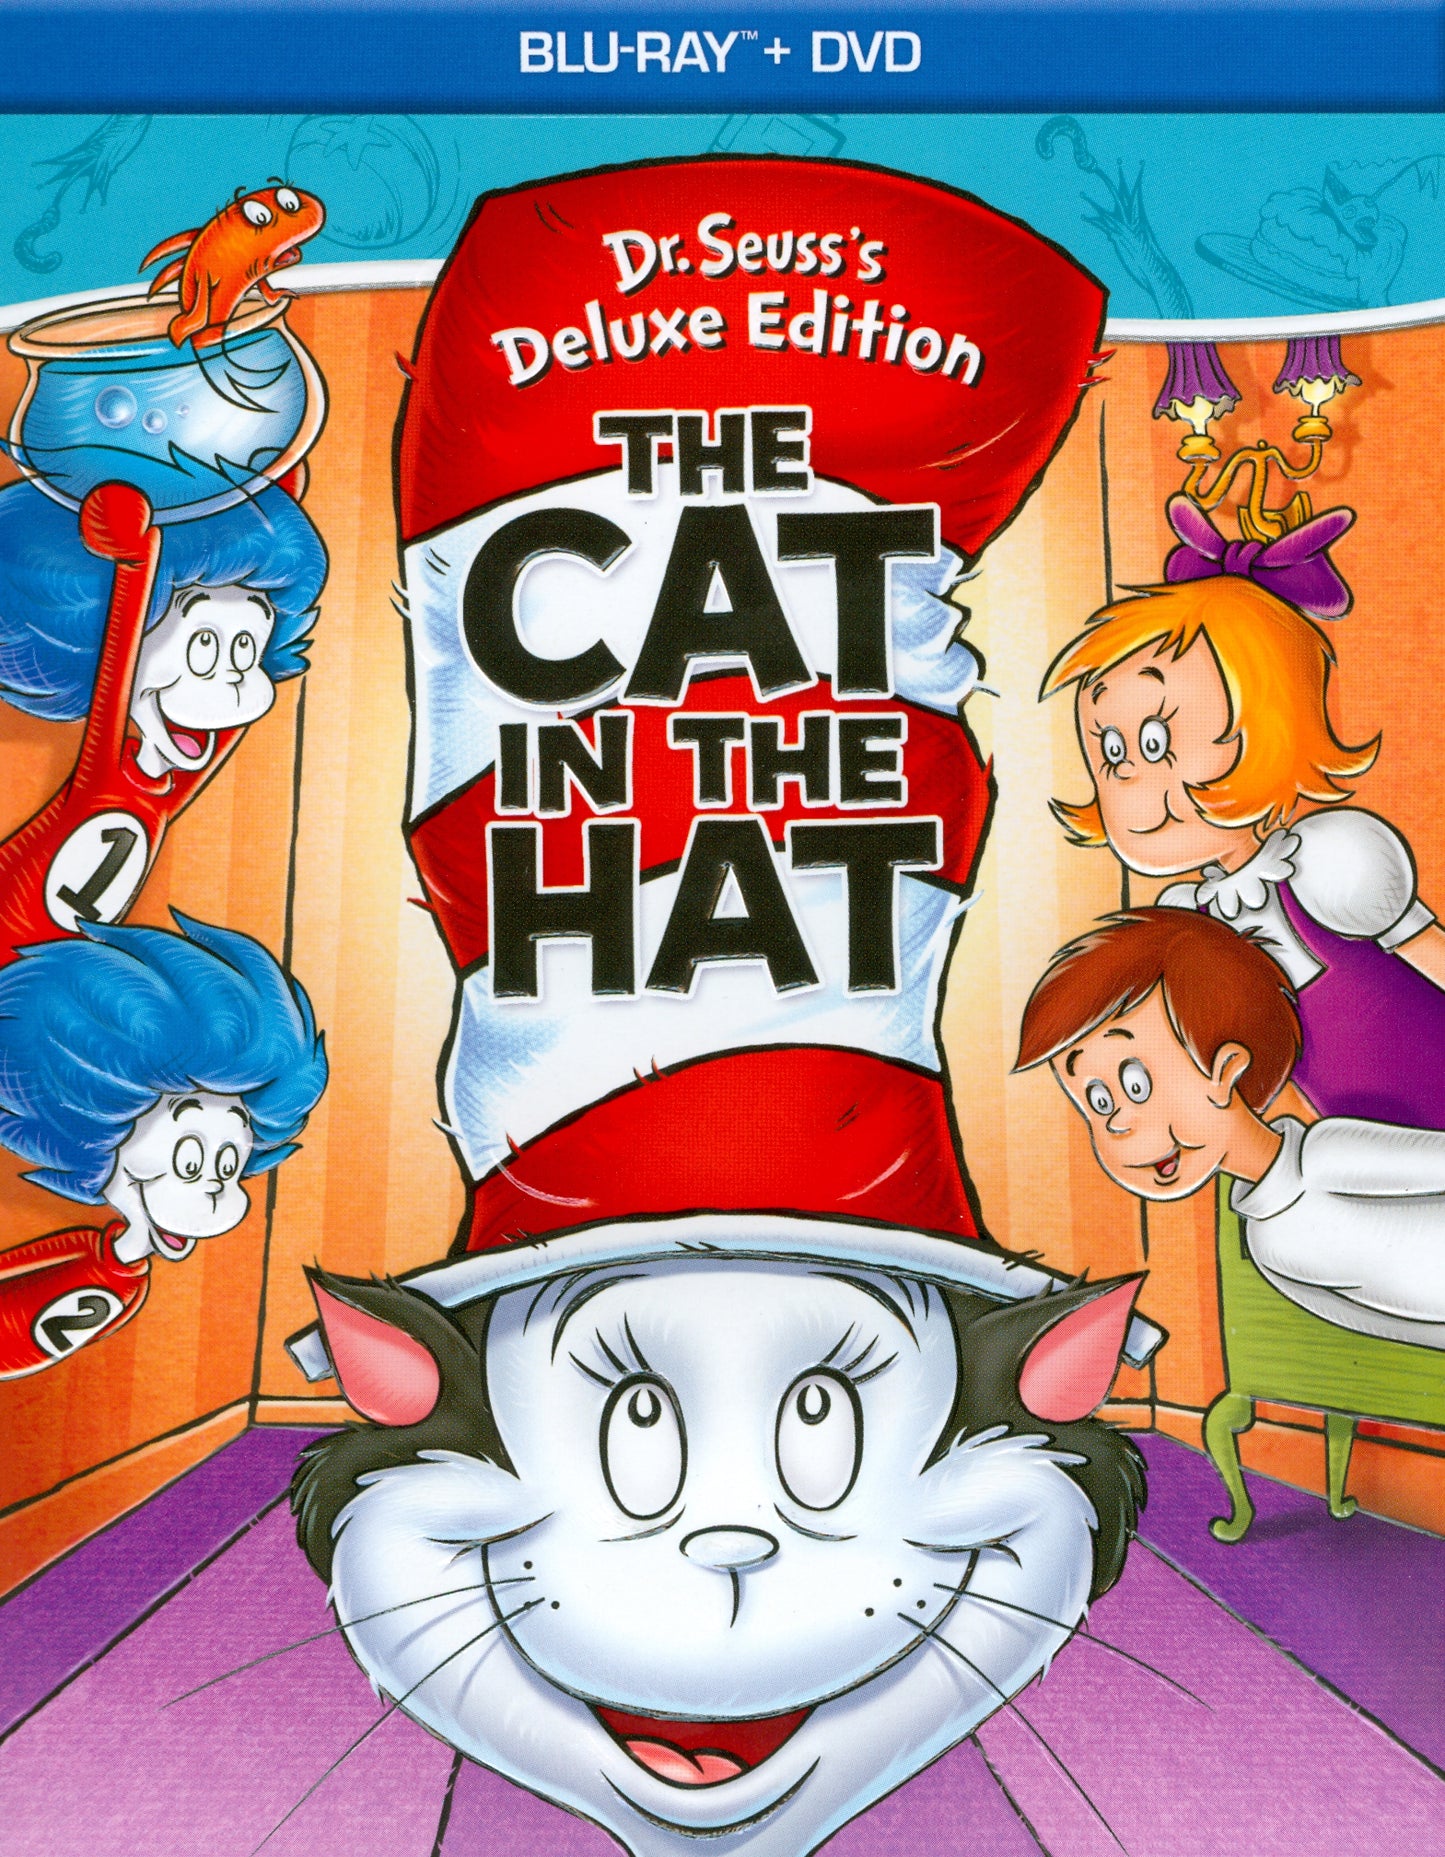 Dr. Seuss's The Cat in the Hat [Deluxe Edition] [2 Discs] [Blu-ray/DVD] cover art